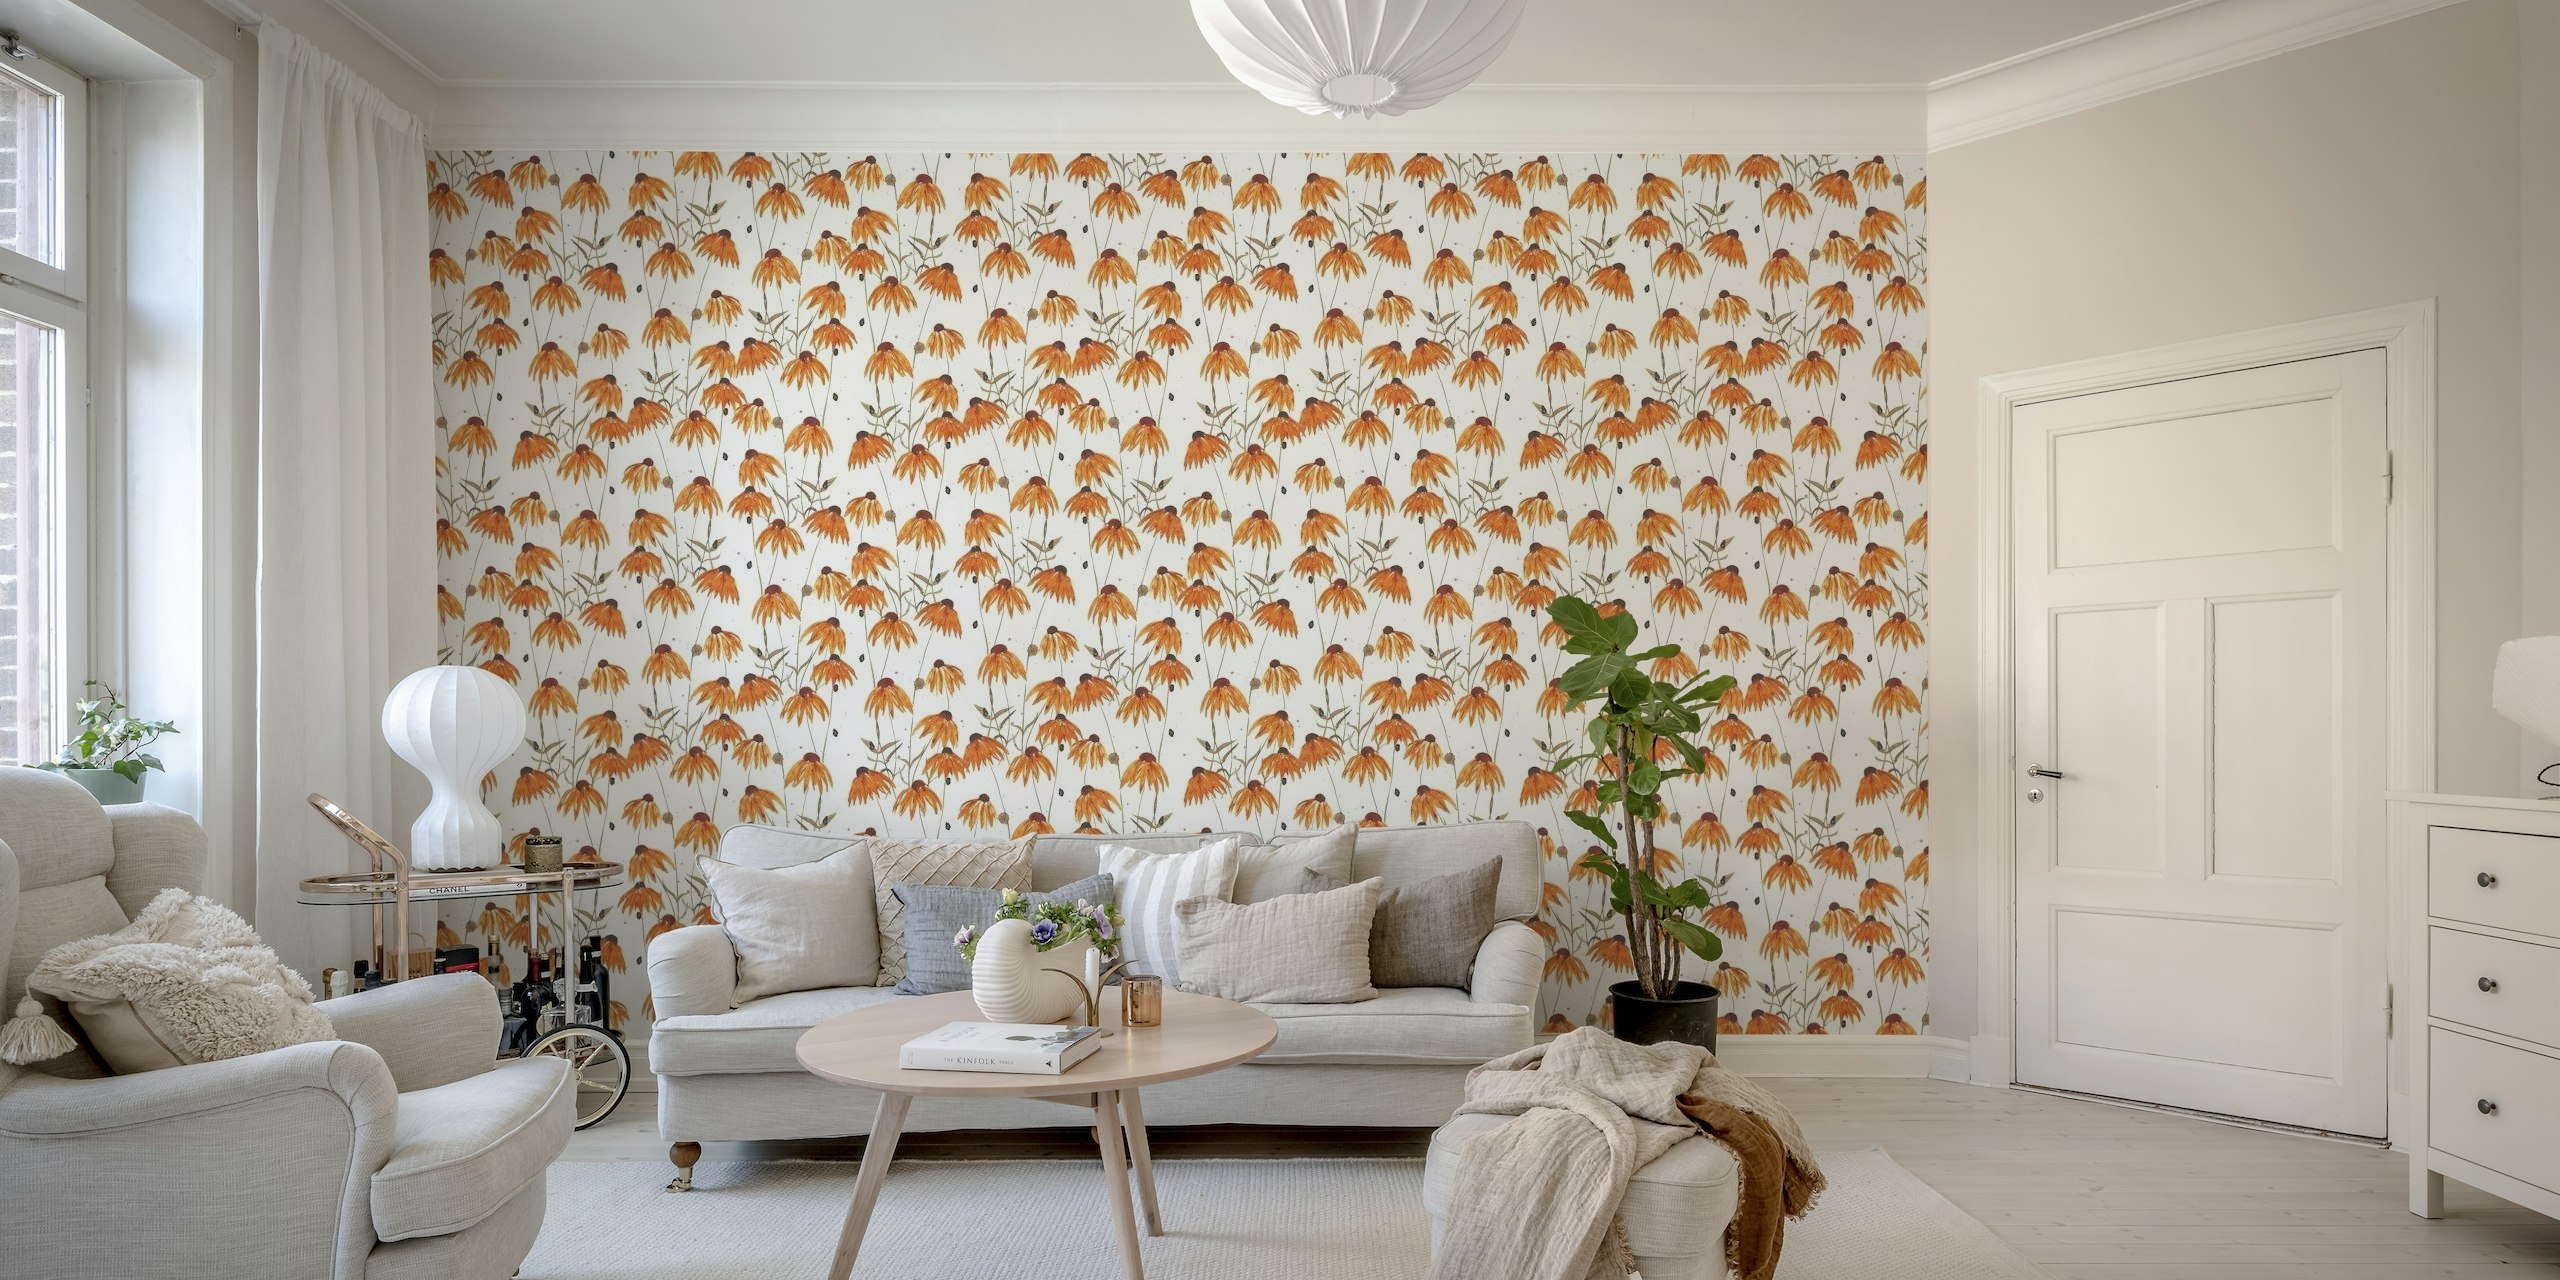 Orange Coneflowers wall mural with a pattern of colorful flowers on a clean white background